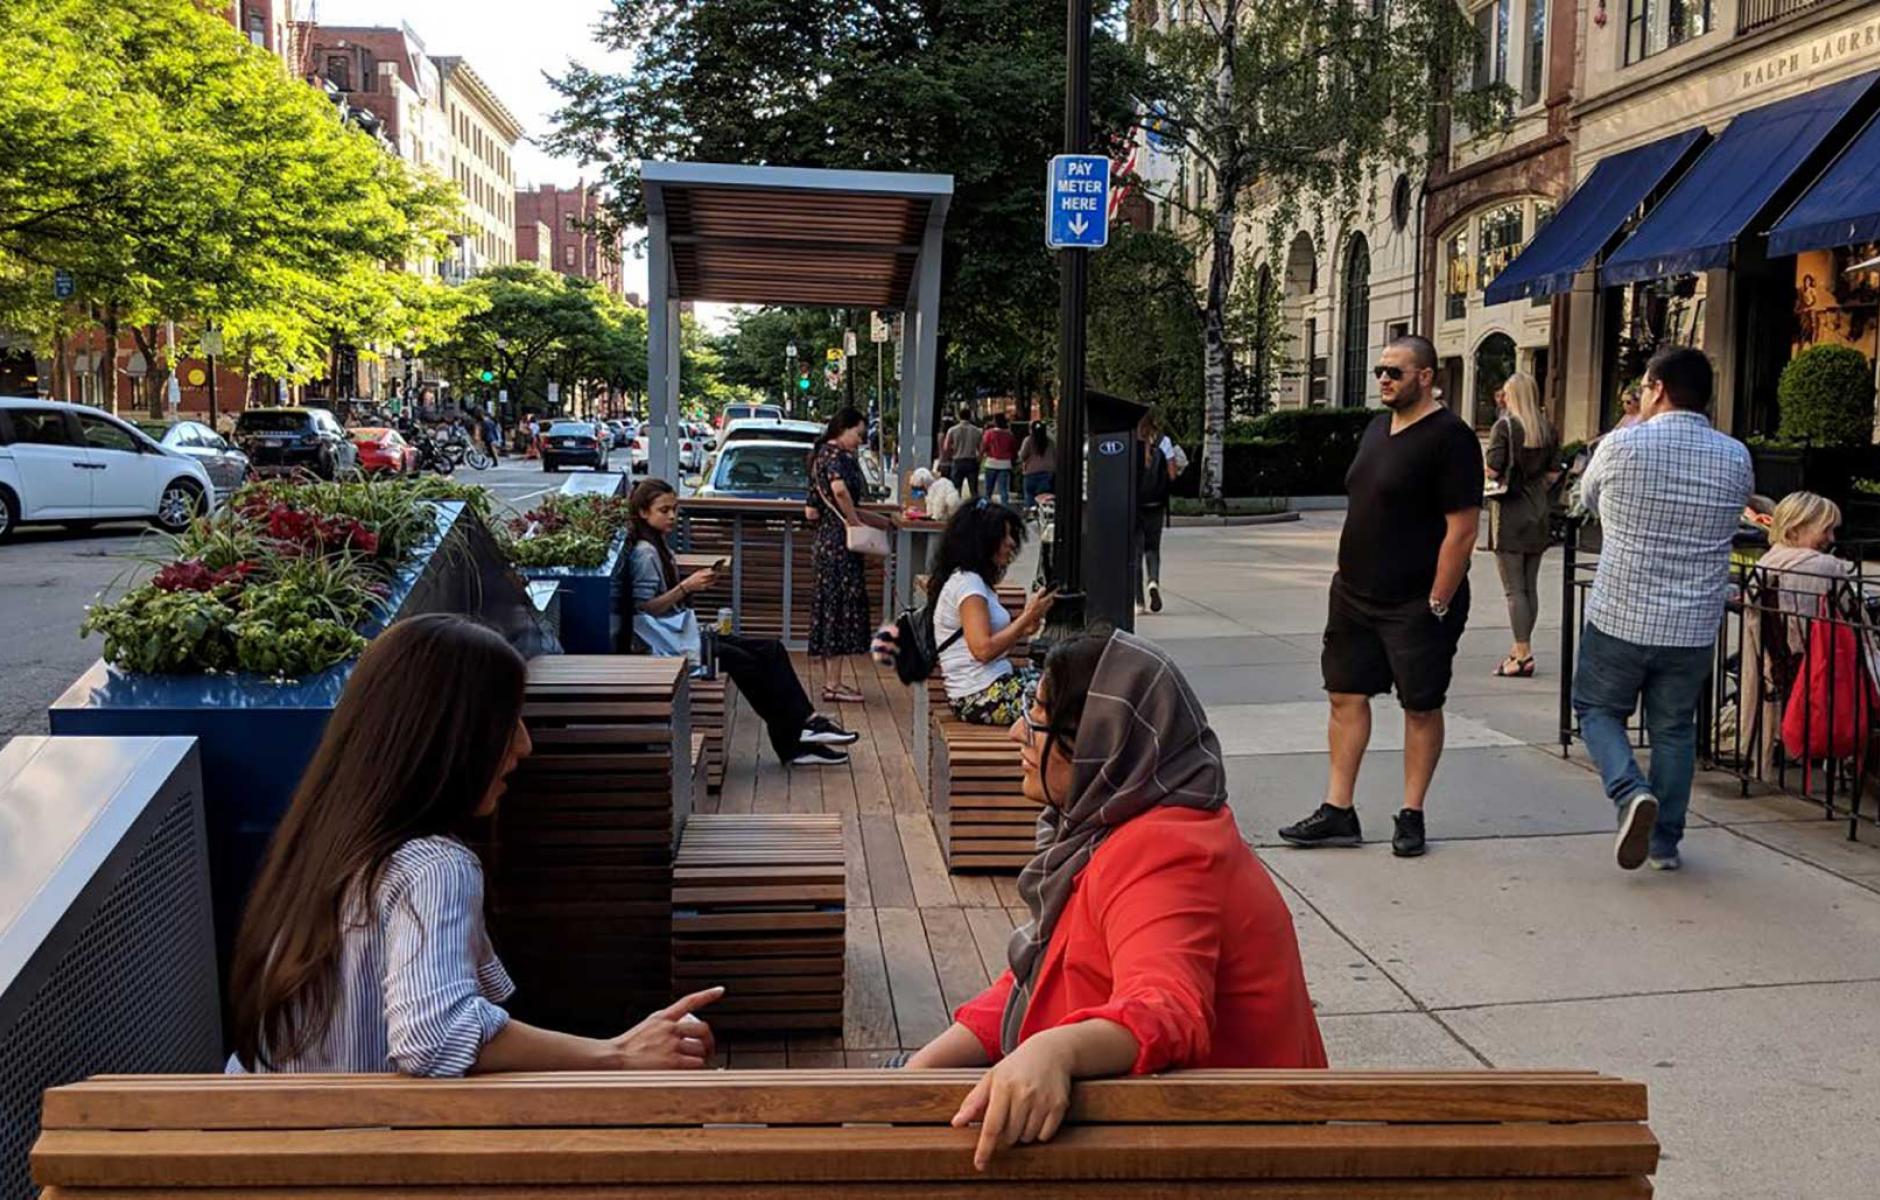 Parklets repurpose on-street parking spaces as mini public parks in Boston. This one was designed by Kyle Zick Landscape Architecture, Inc. Photo credit: Utile Inc.